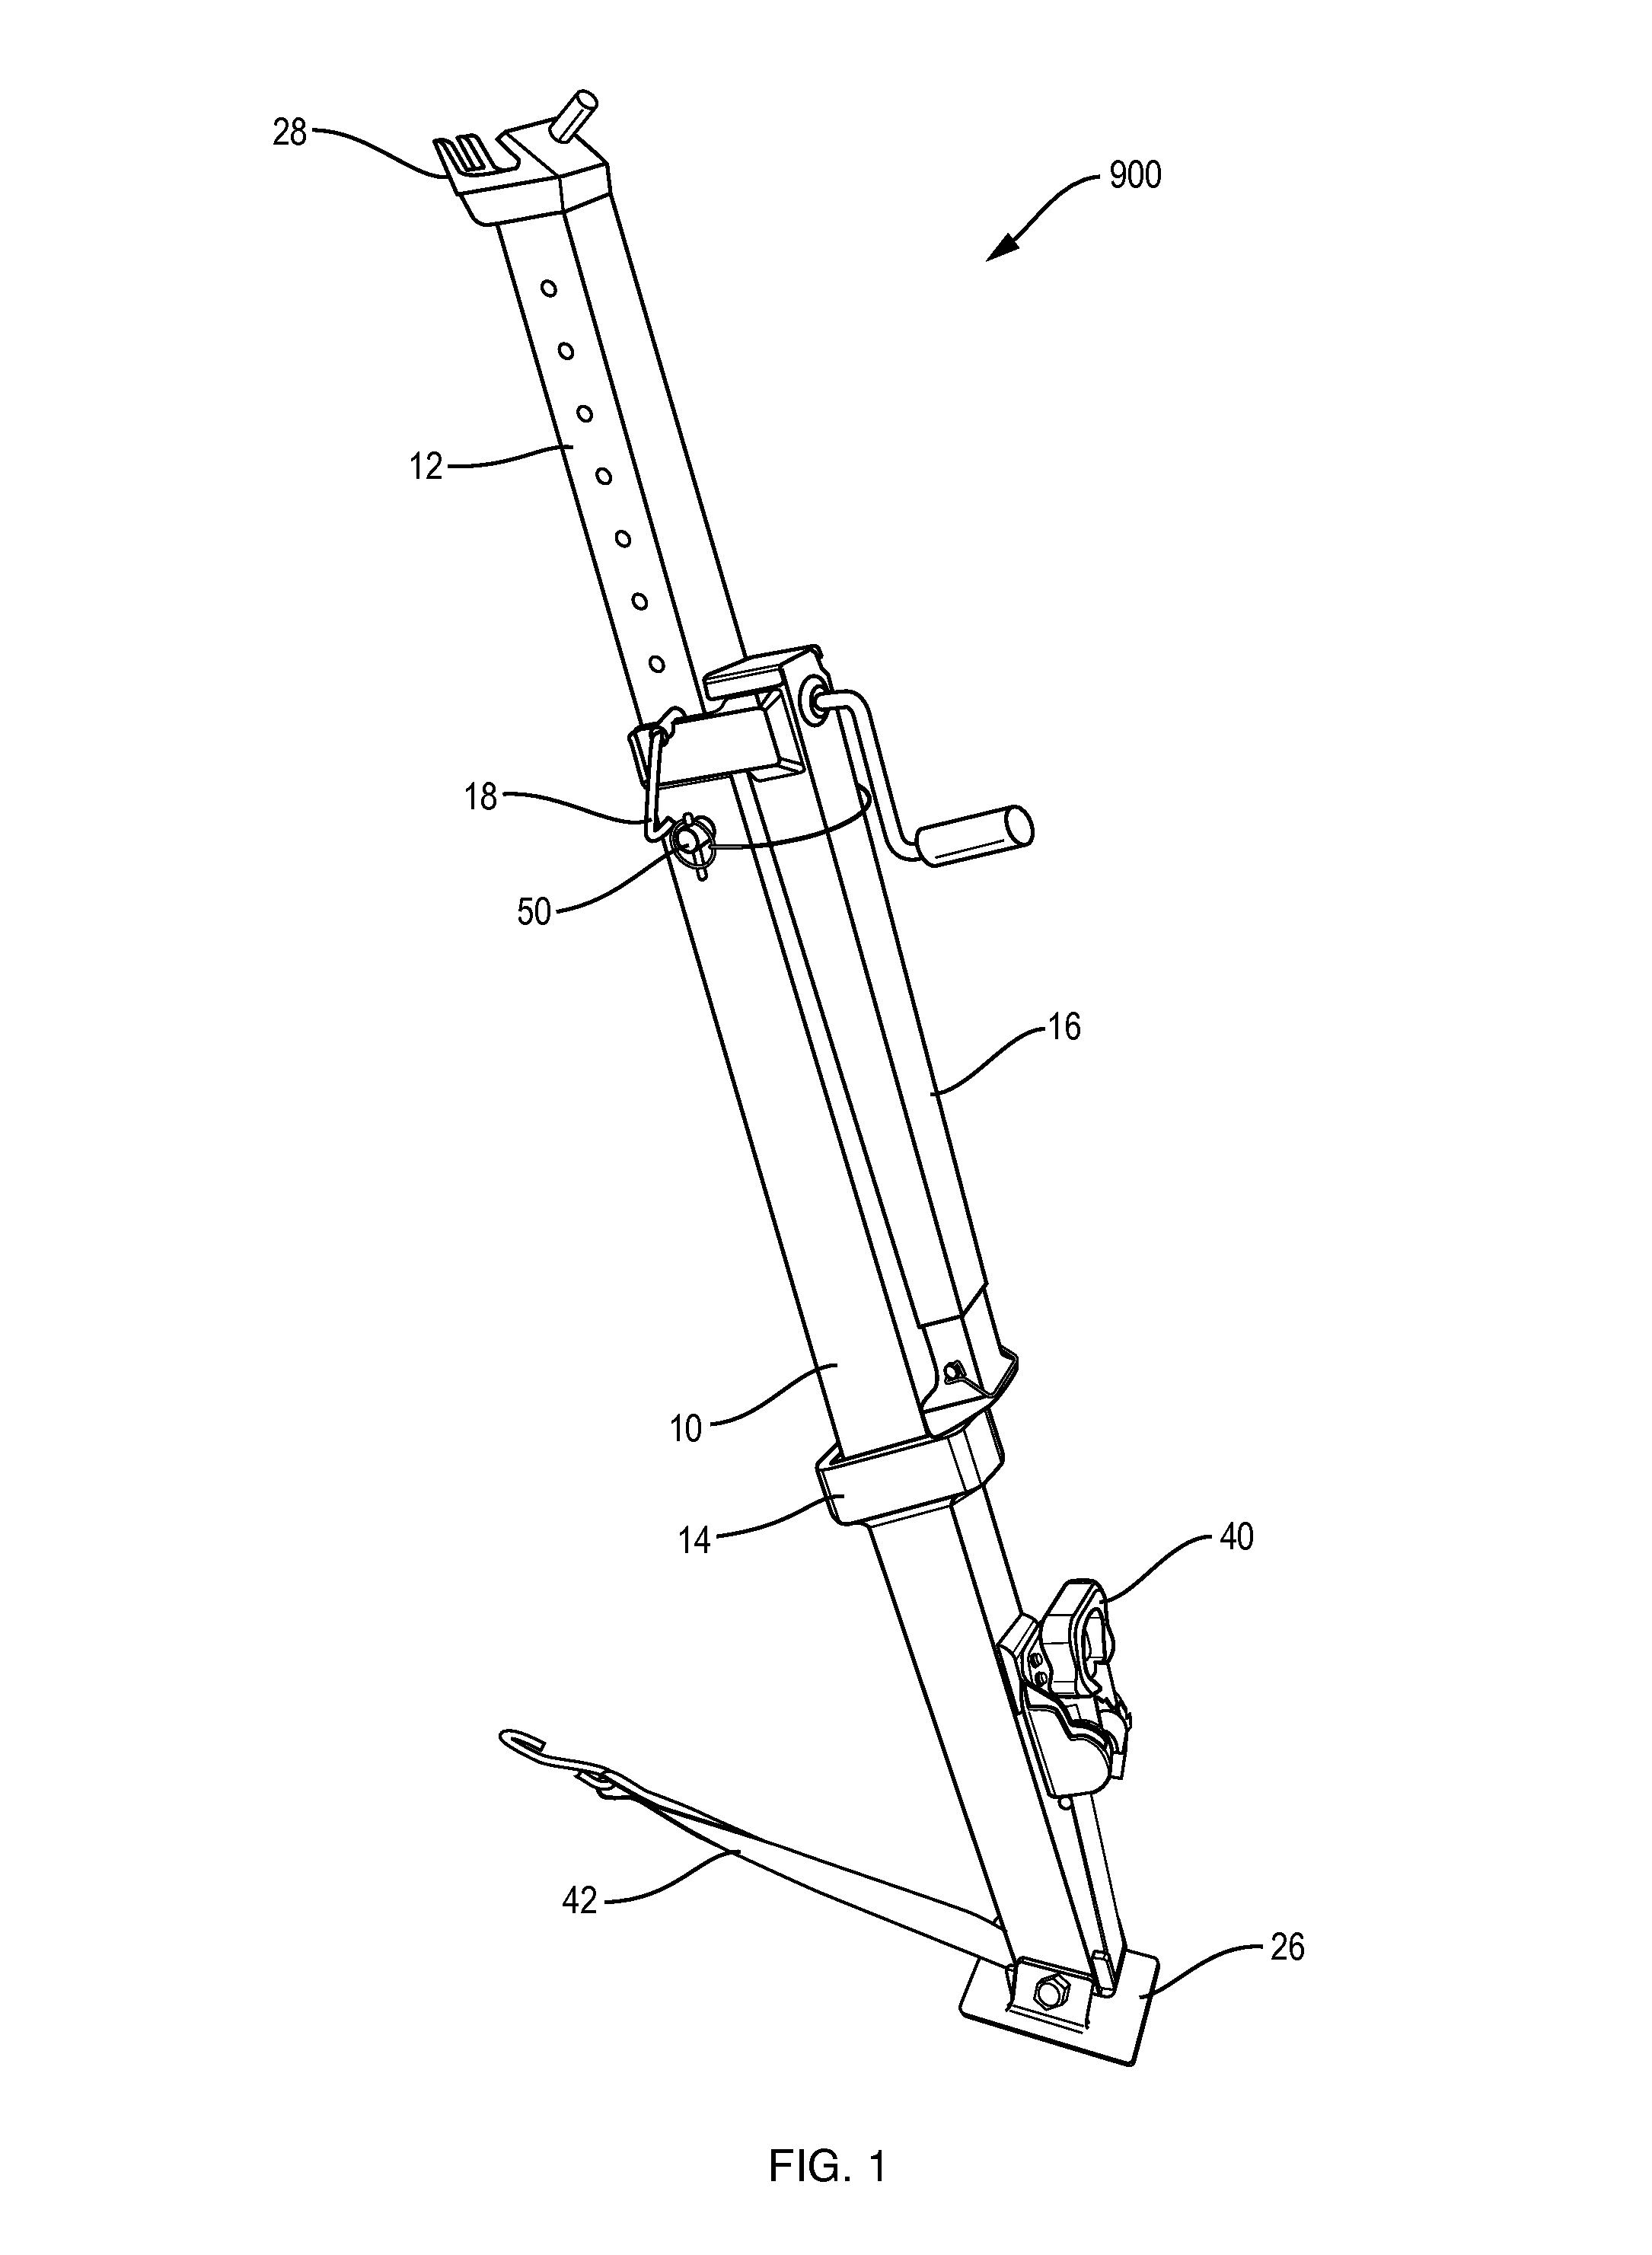 Adjustable lifting and stabilization rescue strut system with improved jack and strut engagement means